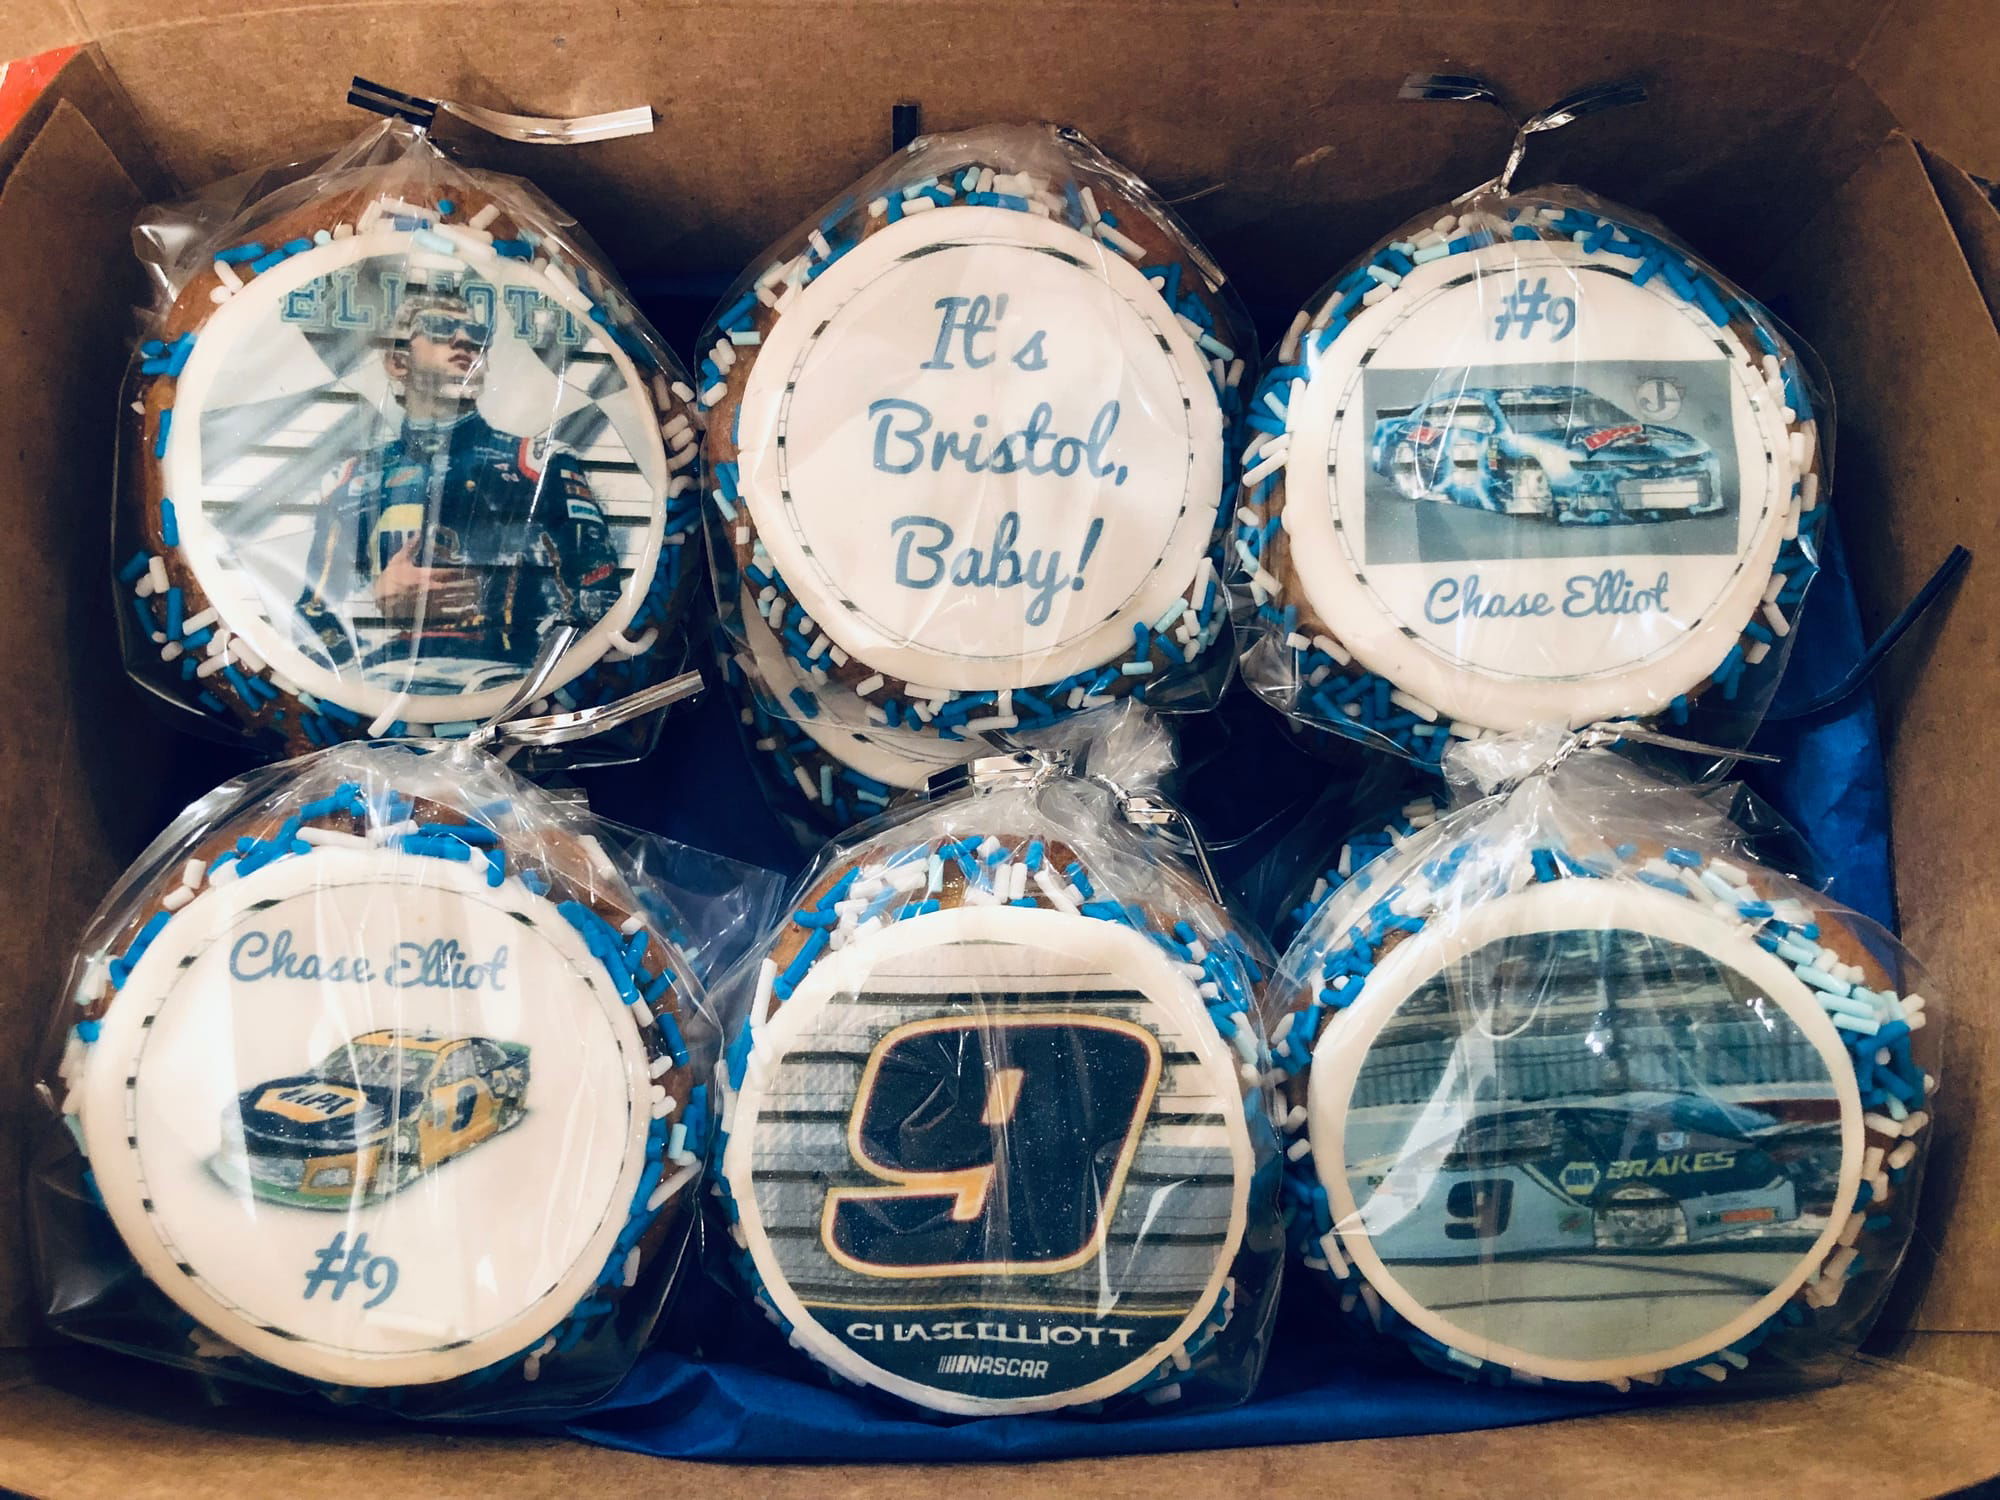 Chase Elliot #9 Racer Chocolate Chip Cookies with Edible Images